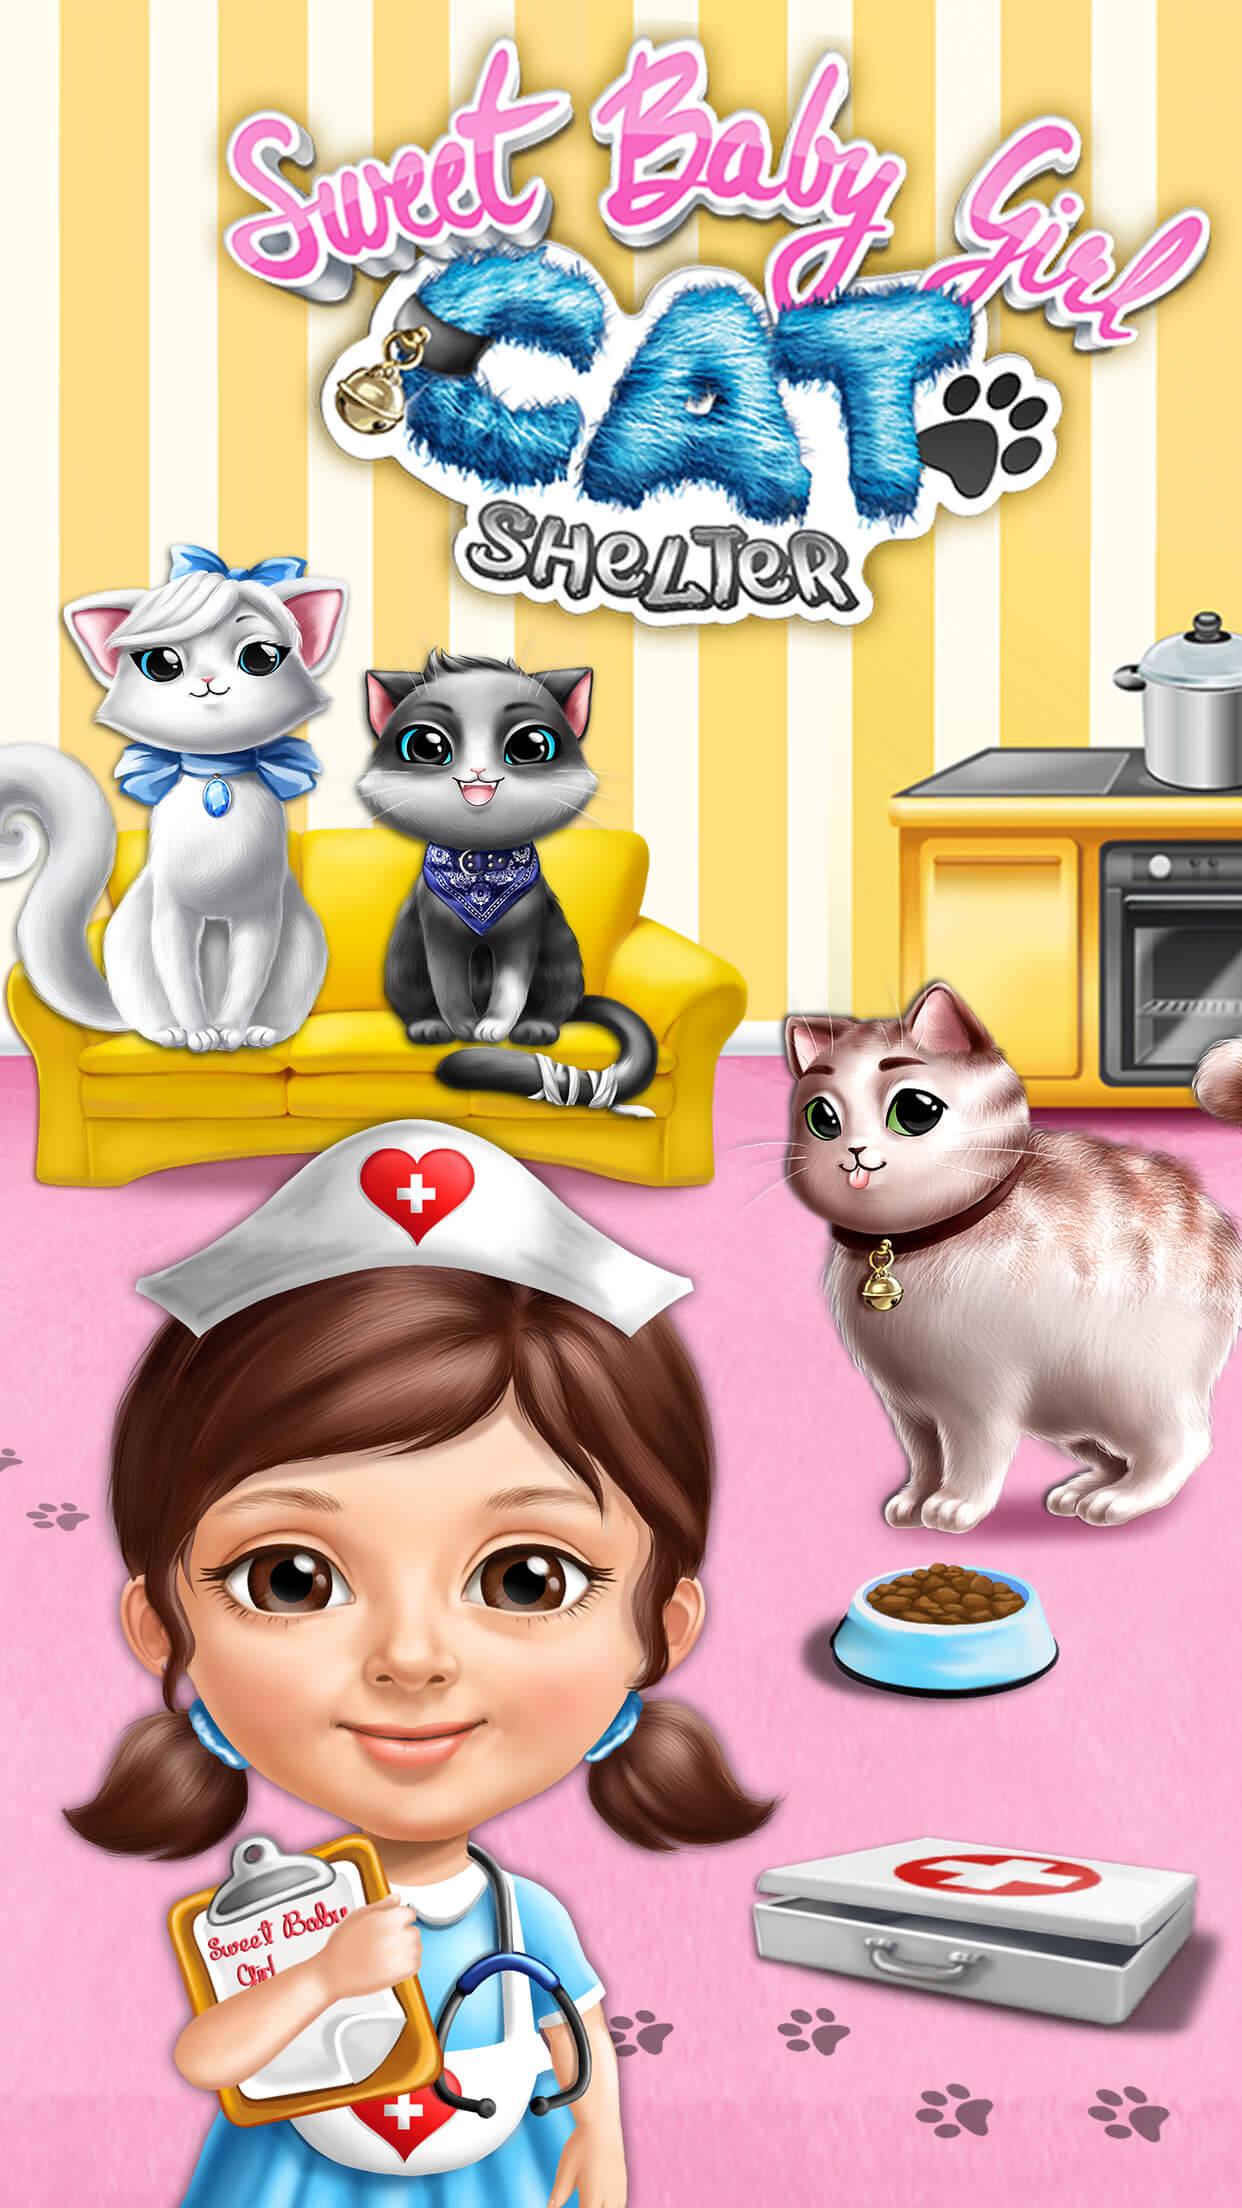 Android application Sweet Baby Girl Cat Shelter screenshort